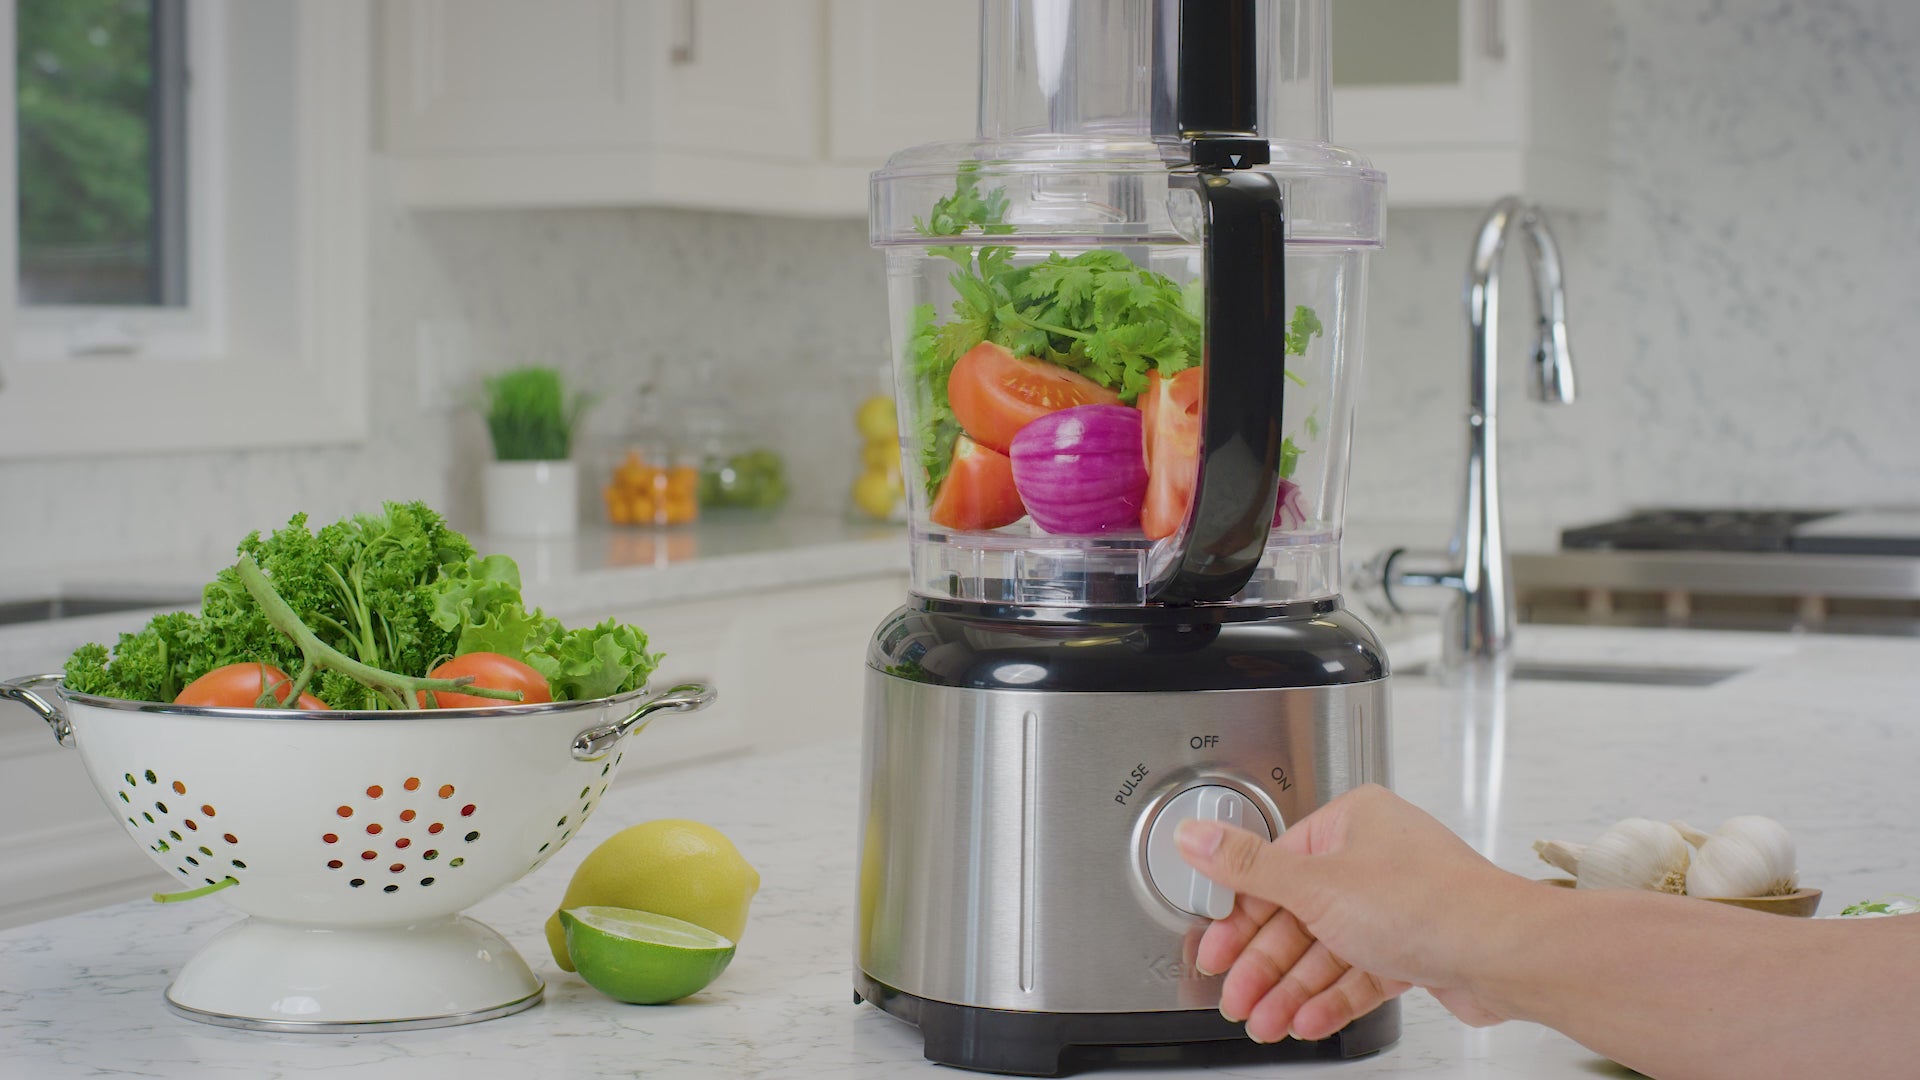 Video with music in the background demonstrates the parts and features of the Kenmore 11 cup food processor and vegetable chopper